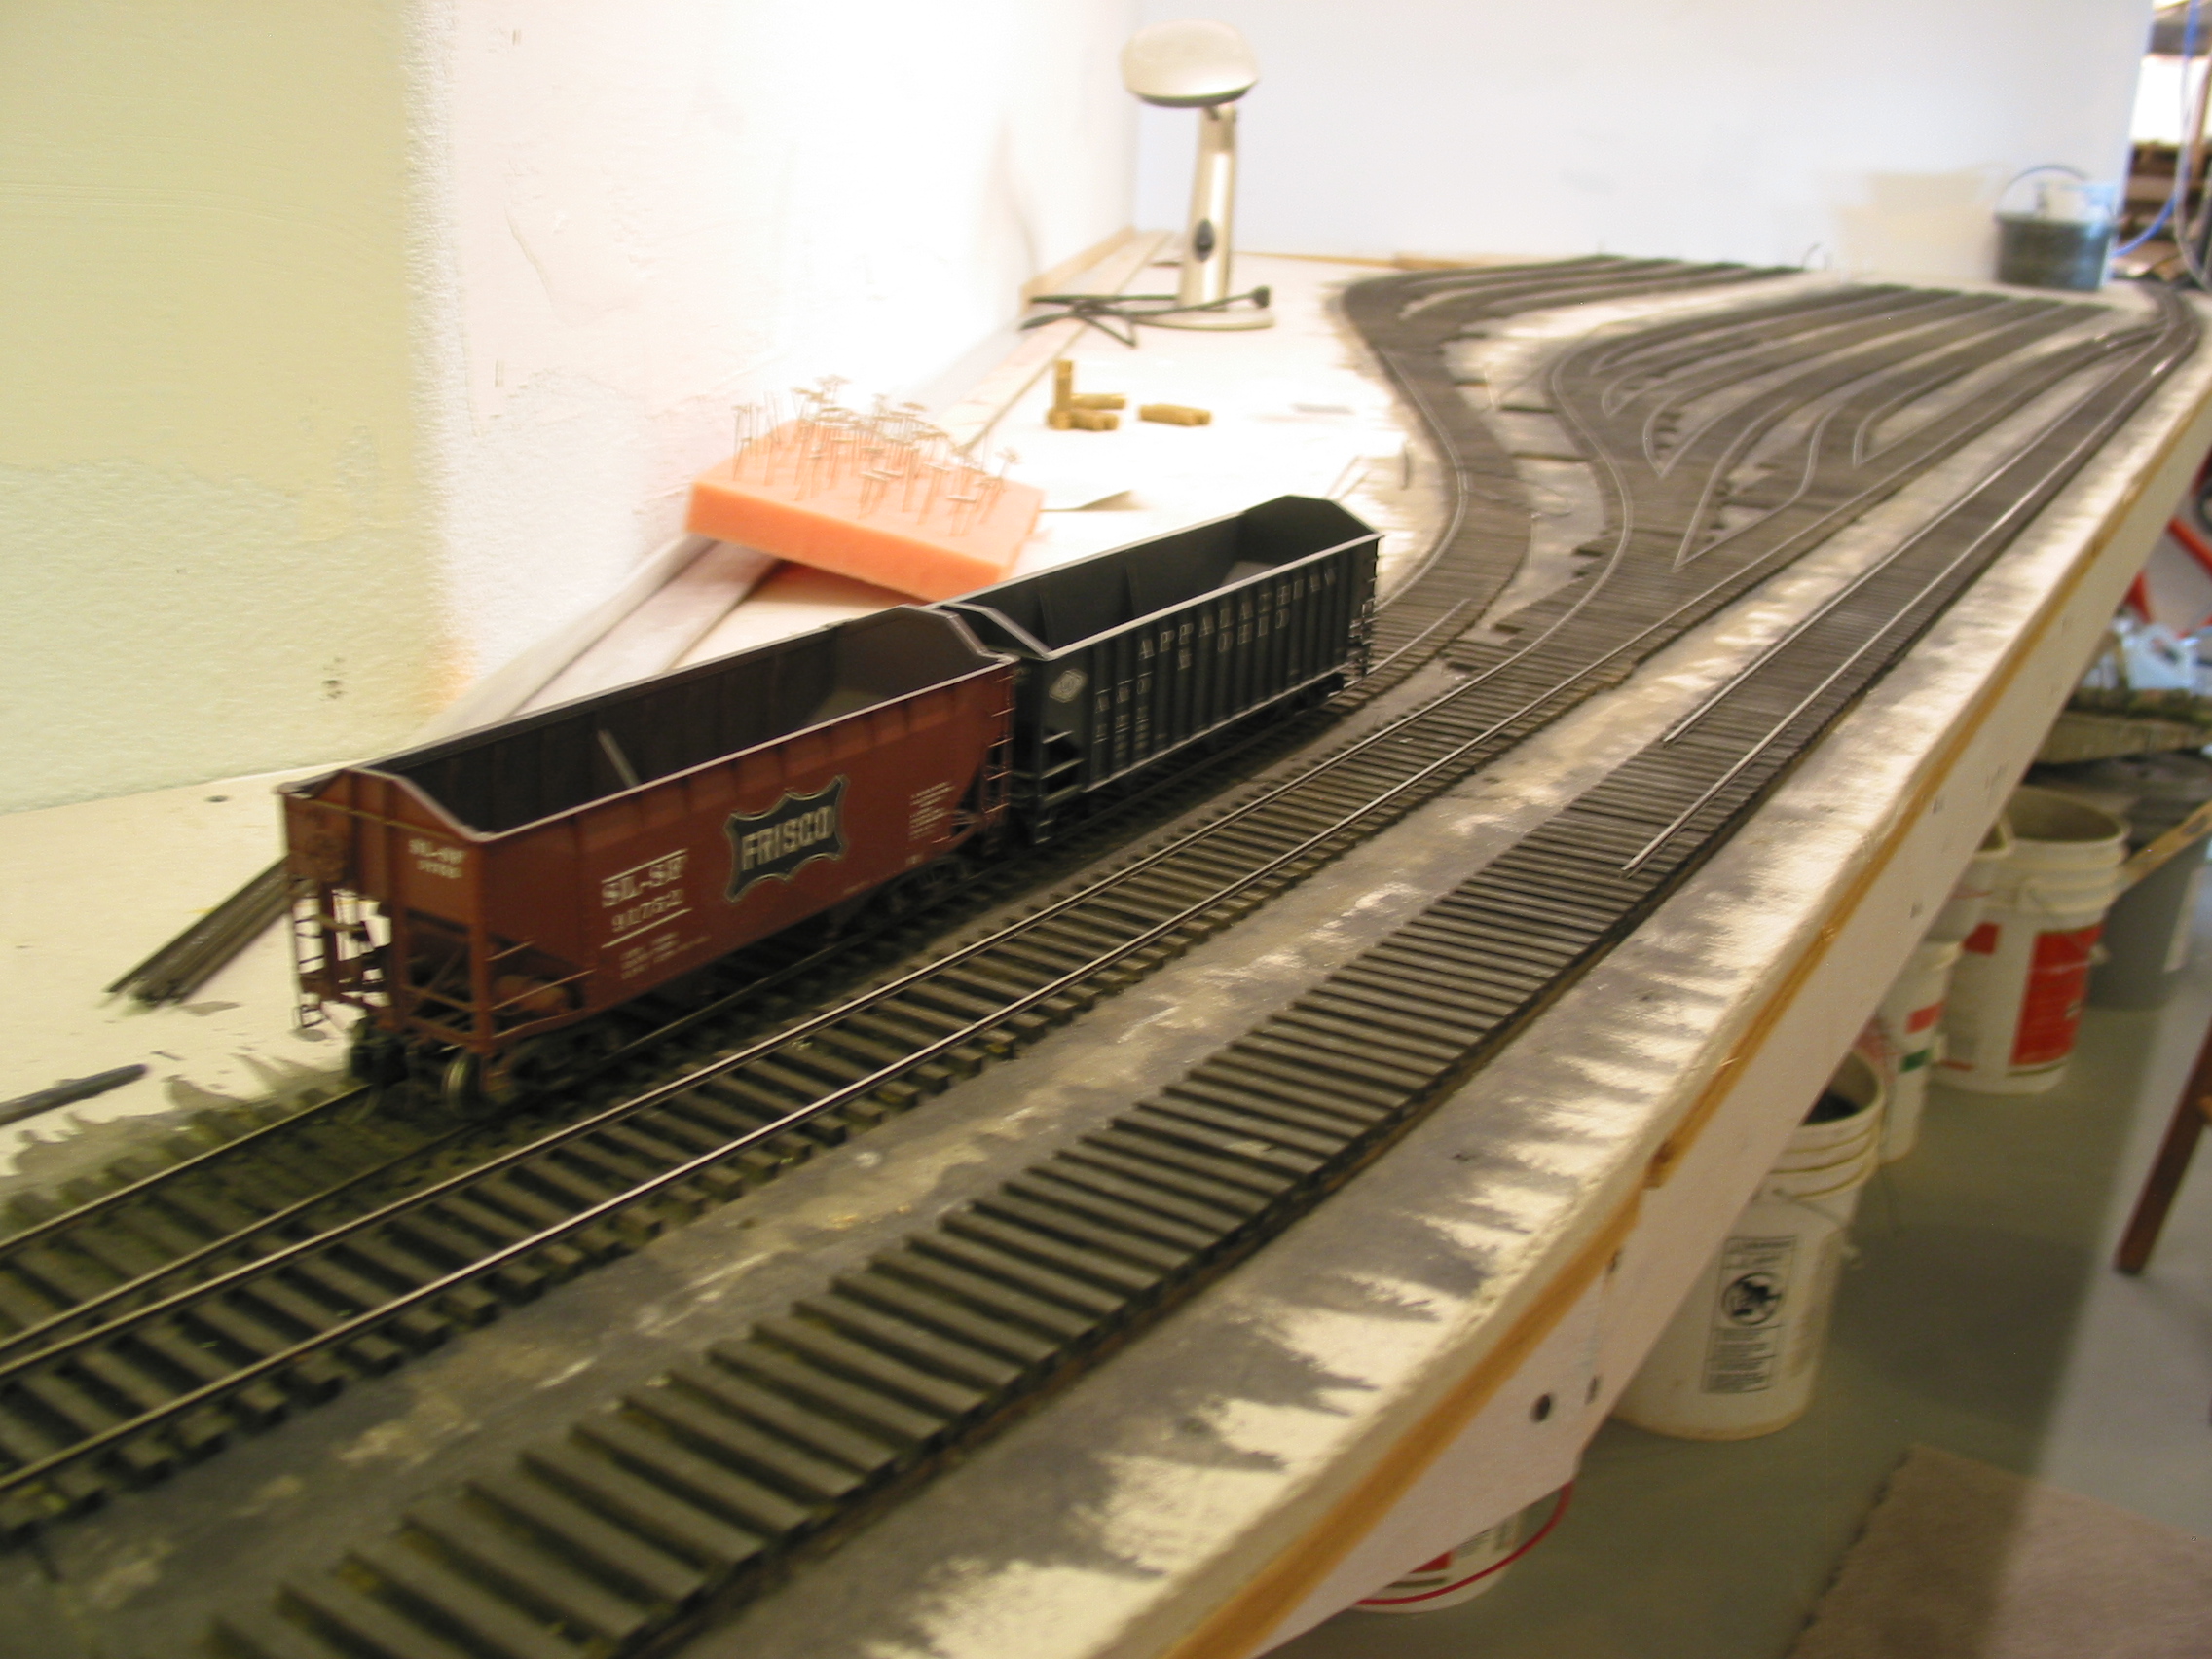  A pair of hoppers test early trackwork and provide inspiration for the project. Vince is a Frisco modeler. 